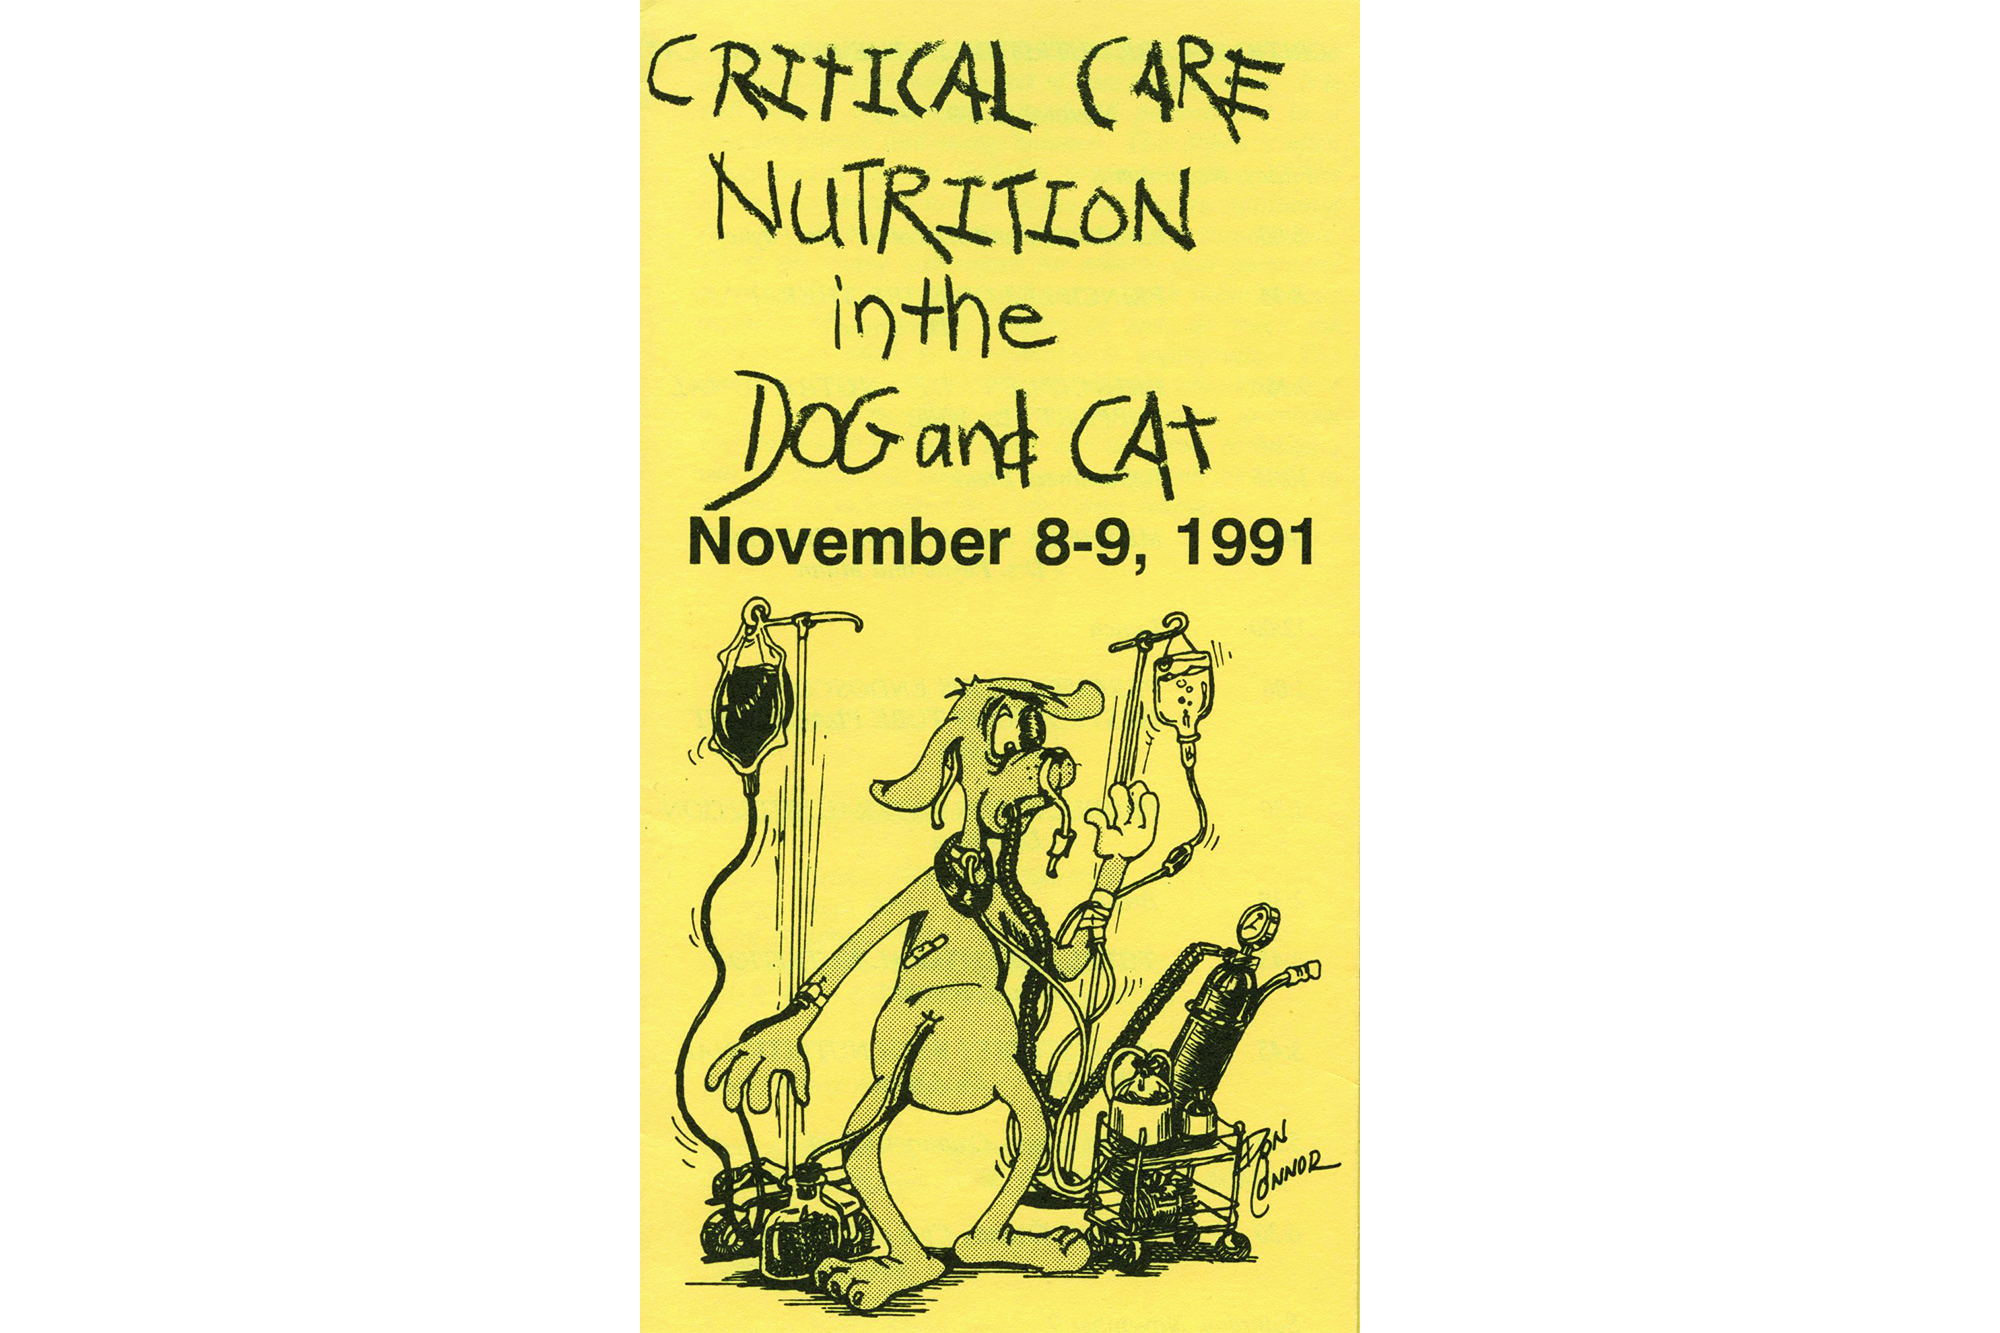 critical care nutrition in the dog and cat illustration from 1991. illustrated by don connor.